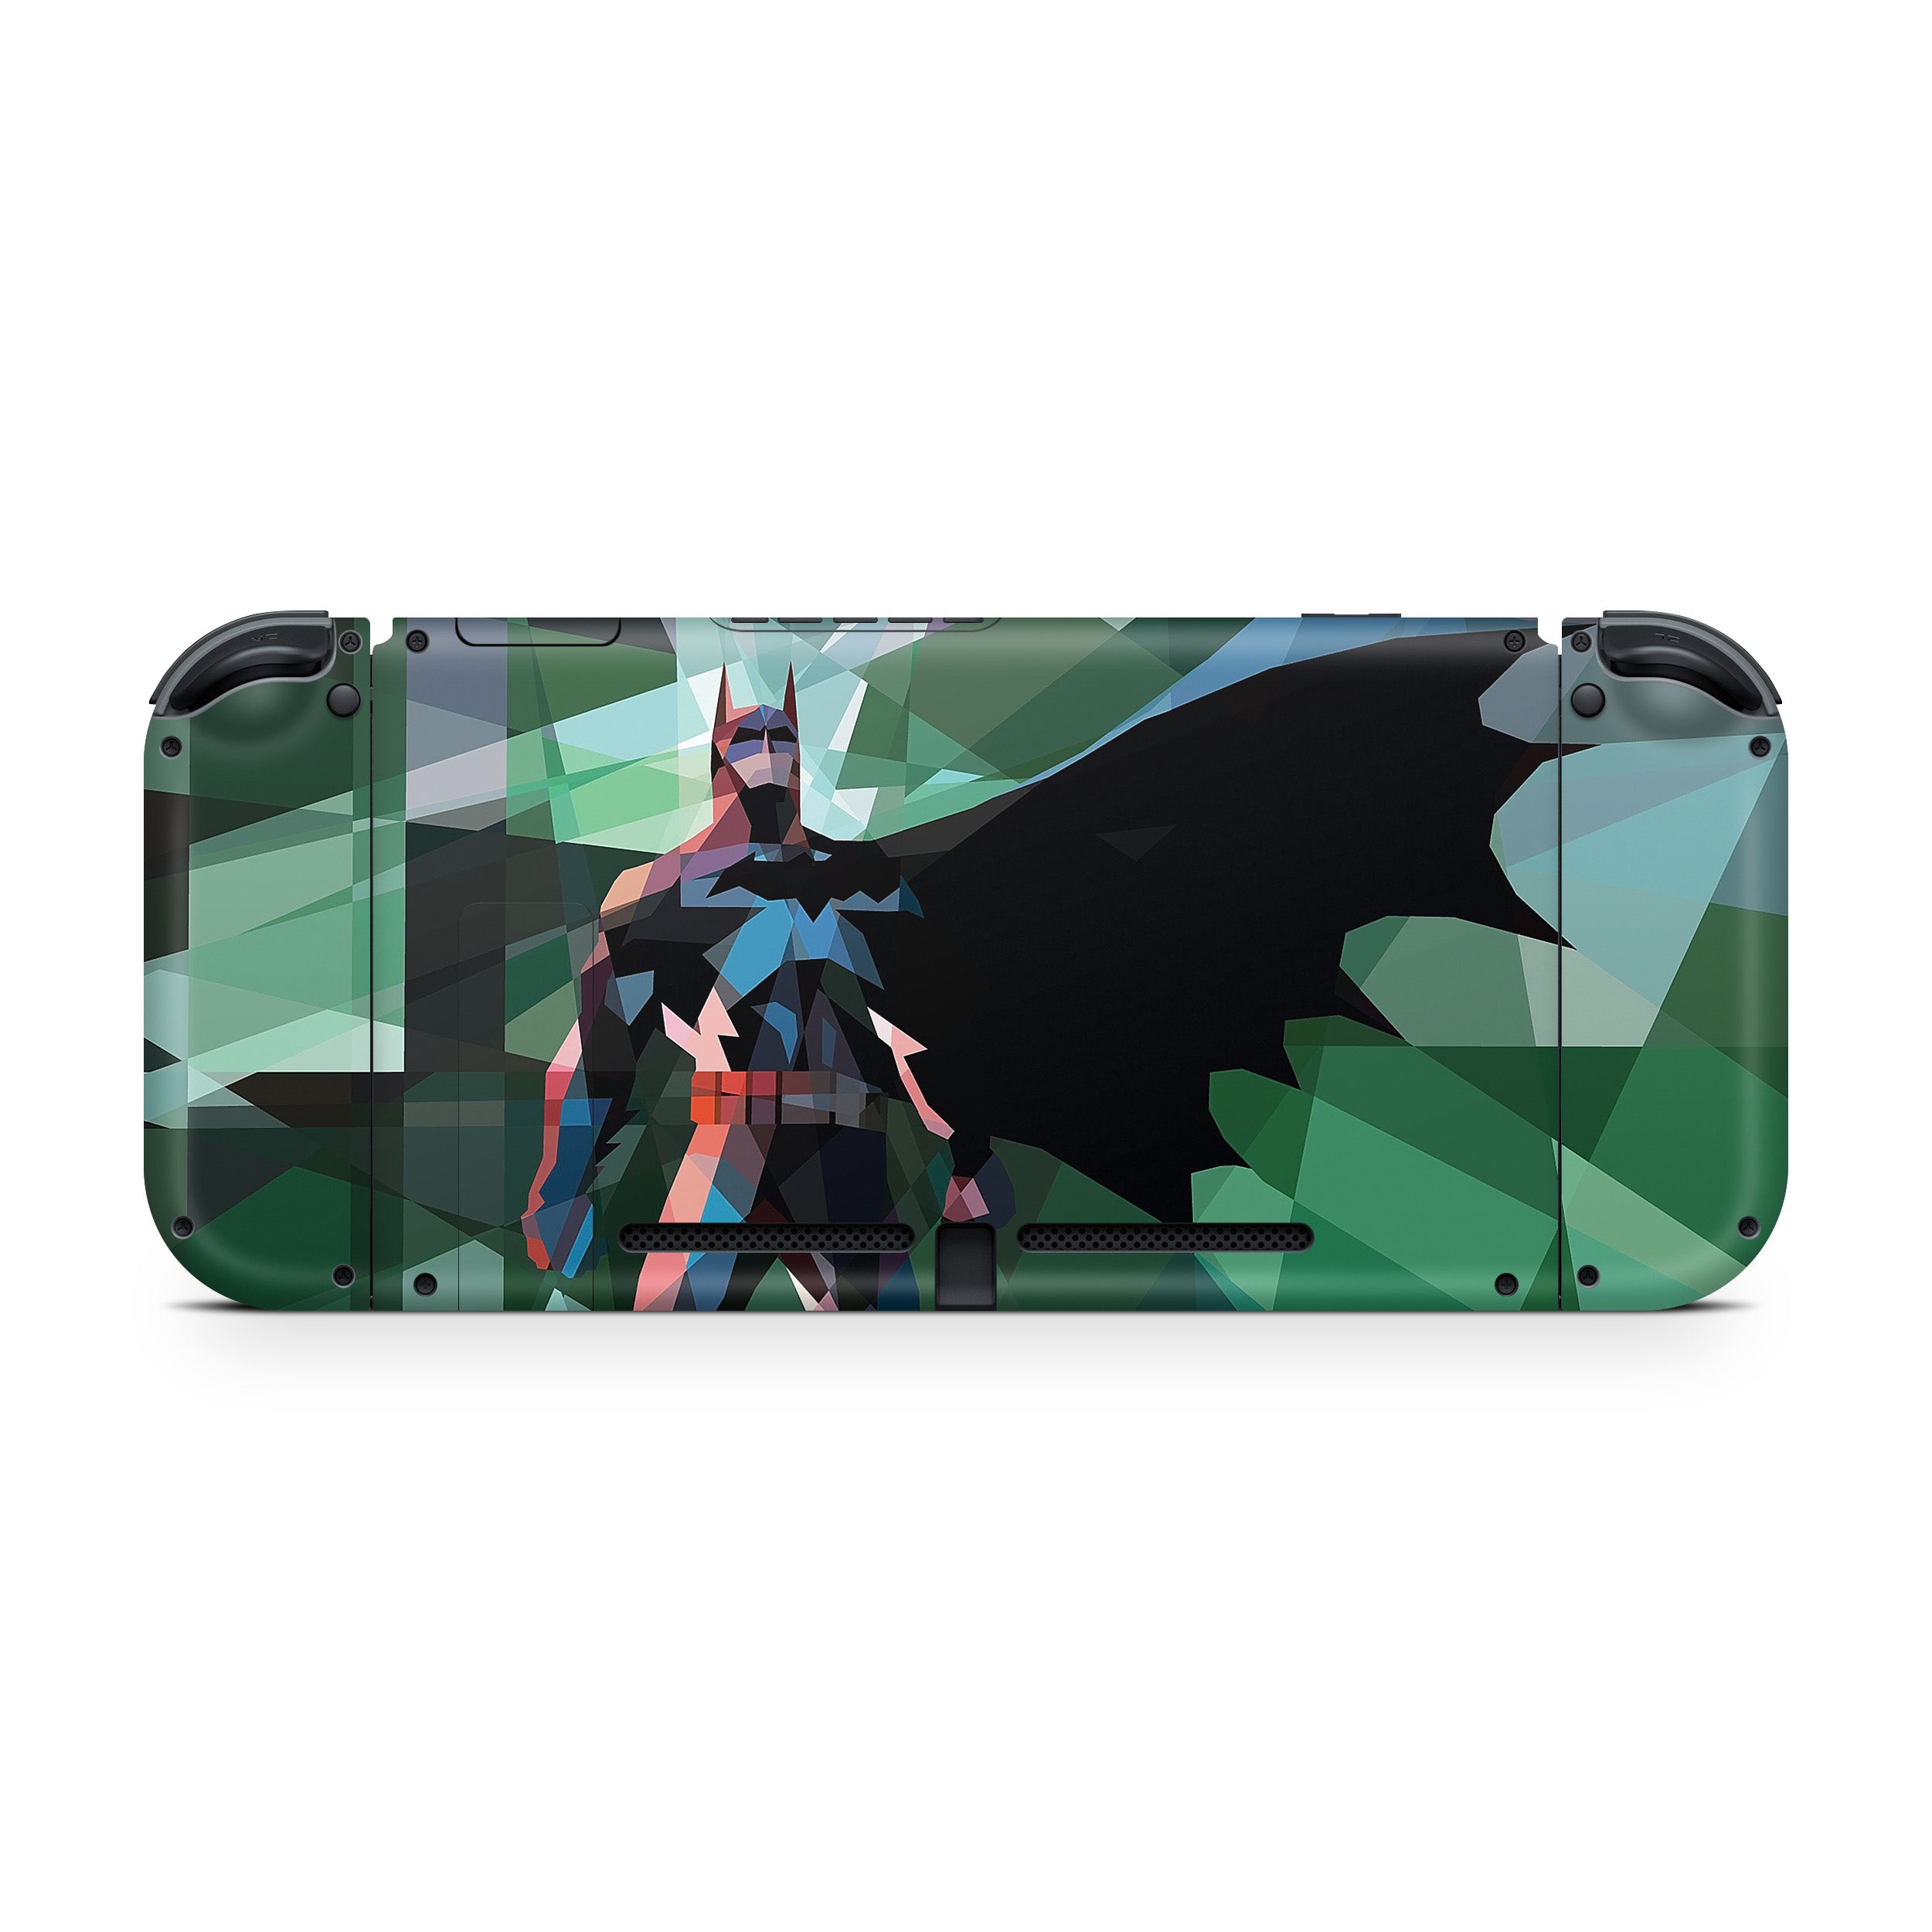 A video game skin featuring a DC Batman design for the Nintendo Switch.